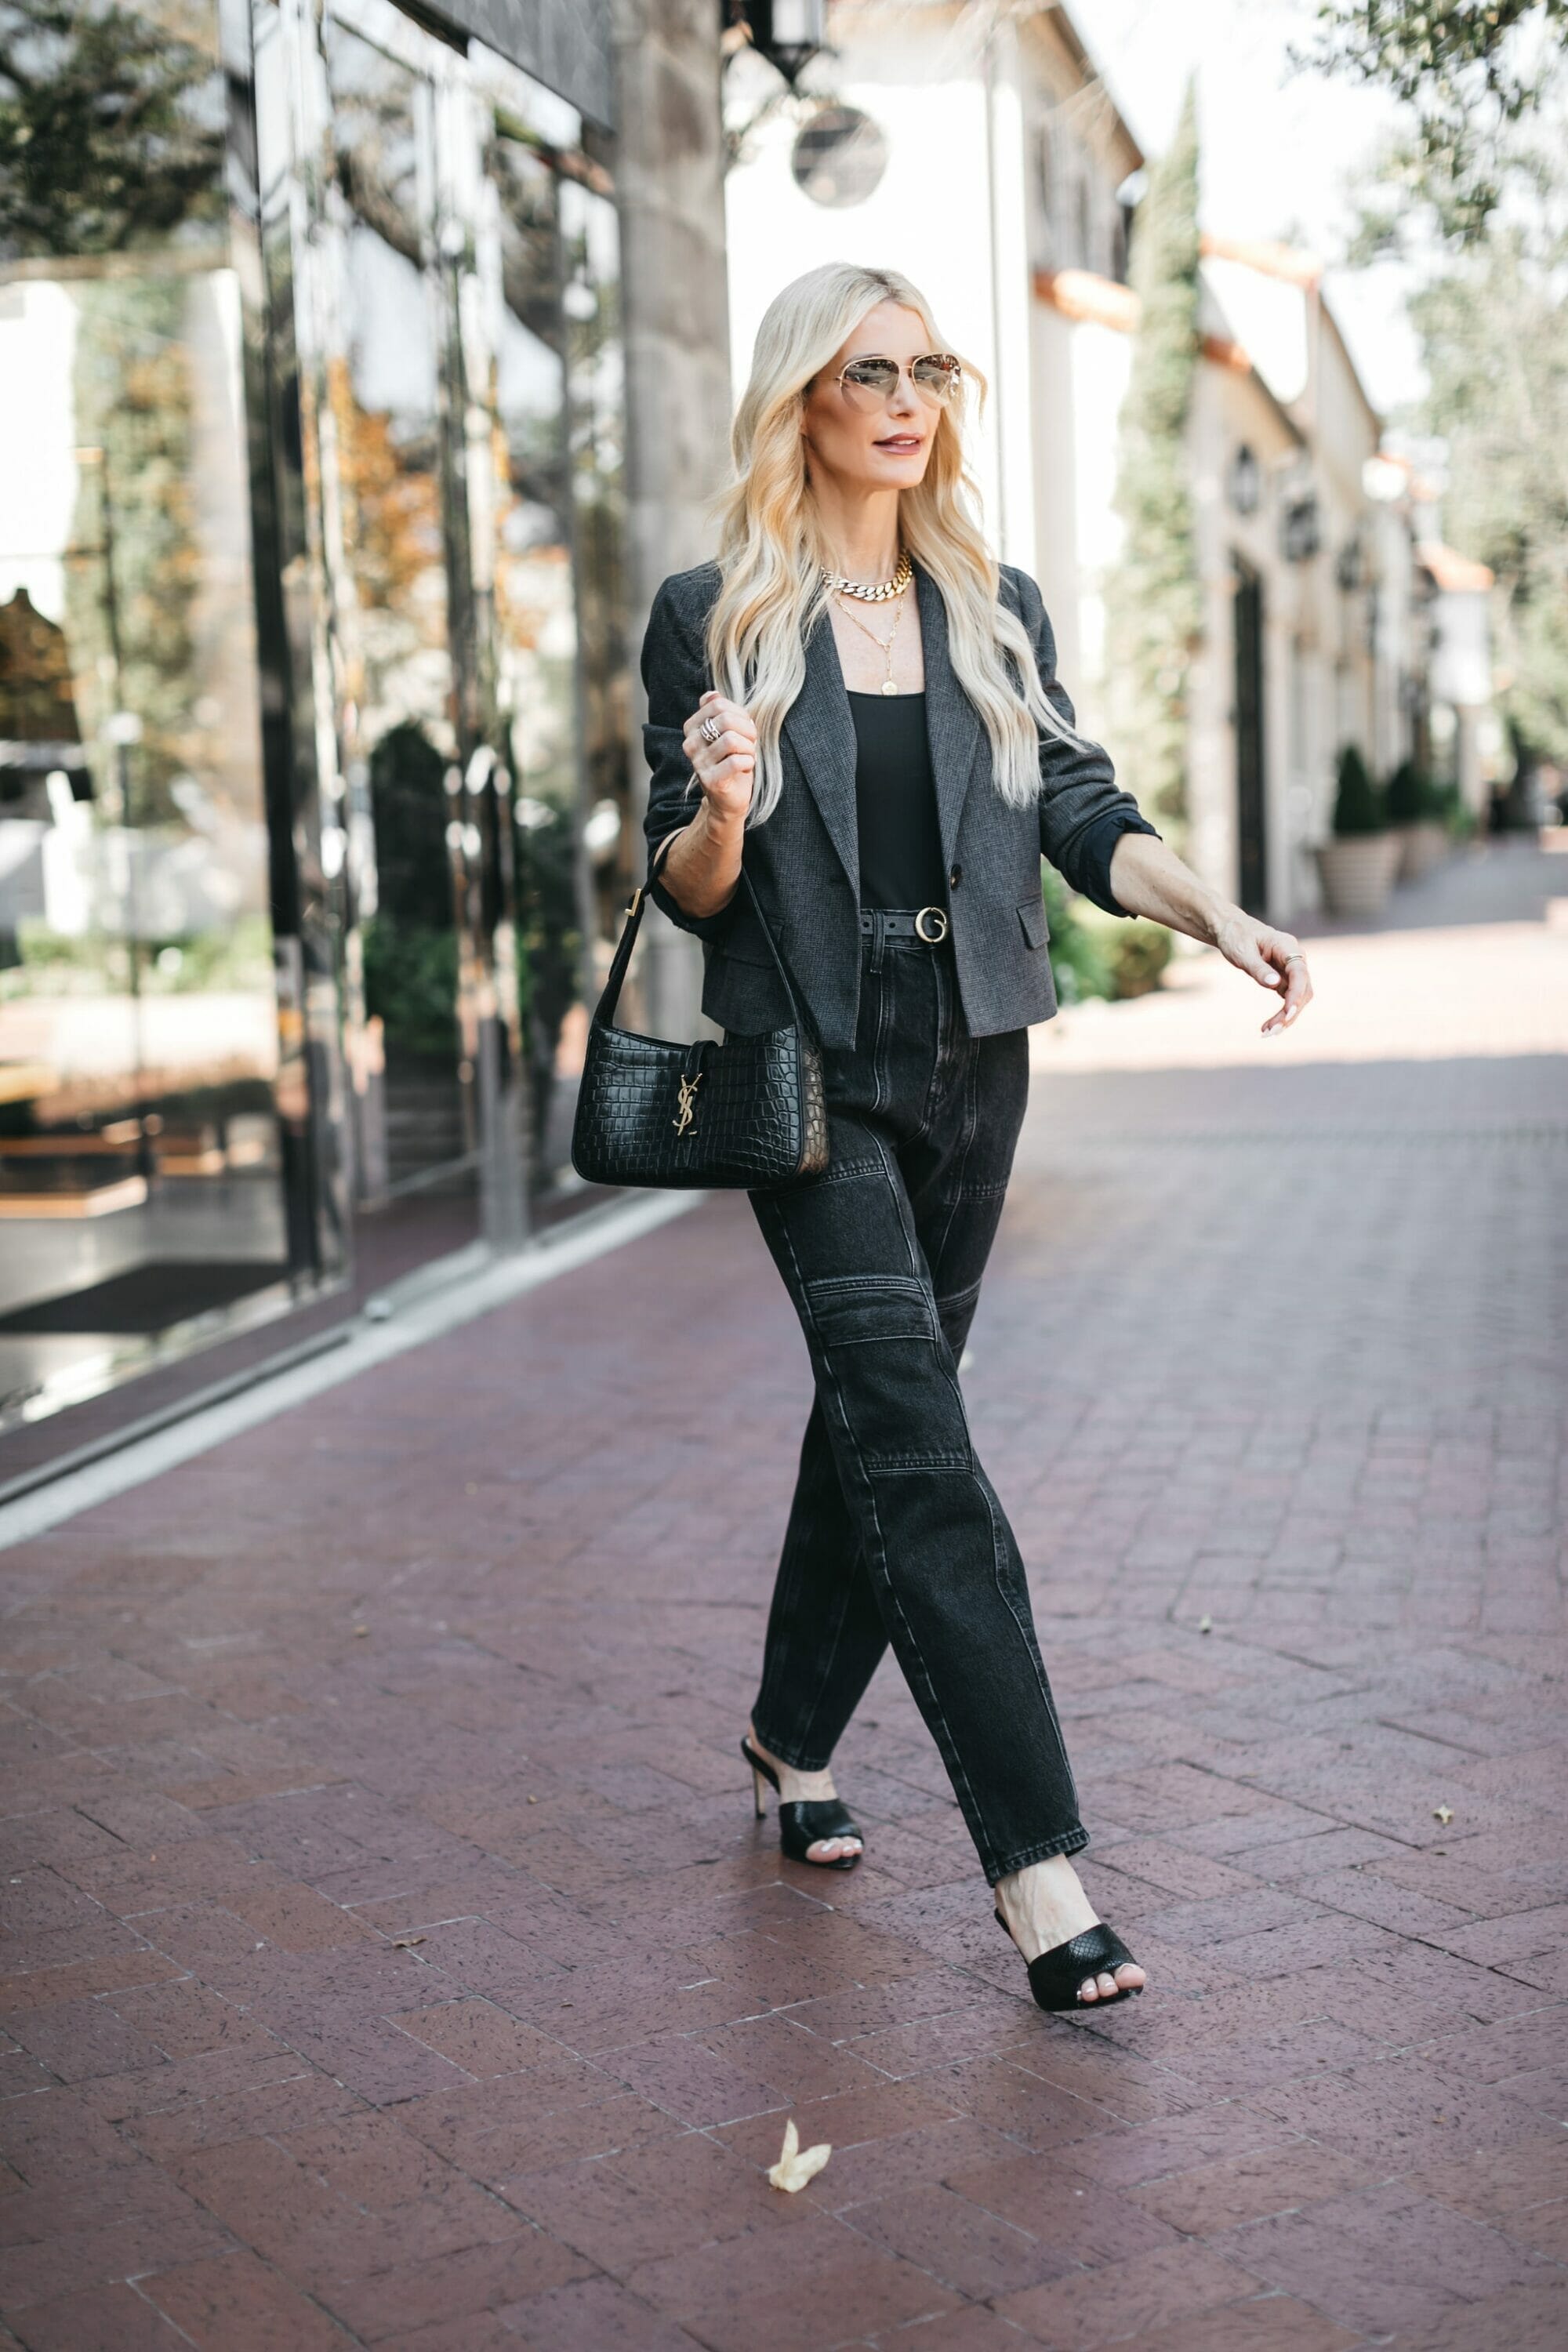 Flare Plaid Pants Outfit Idea  Edgy work outfits, Edgy outfits